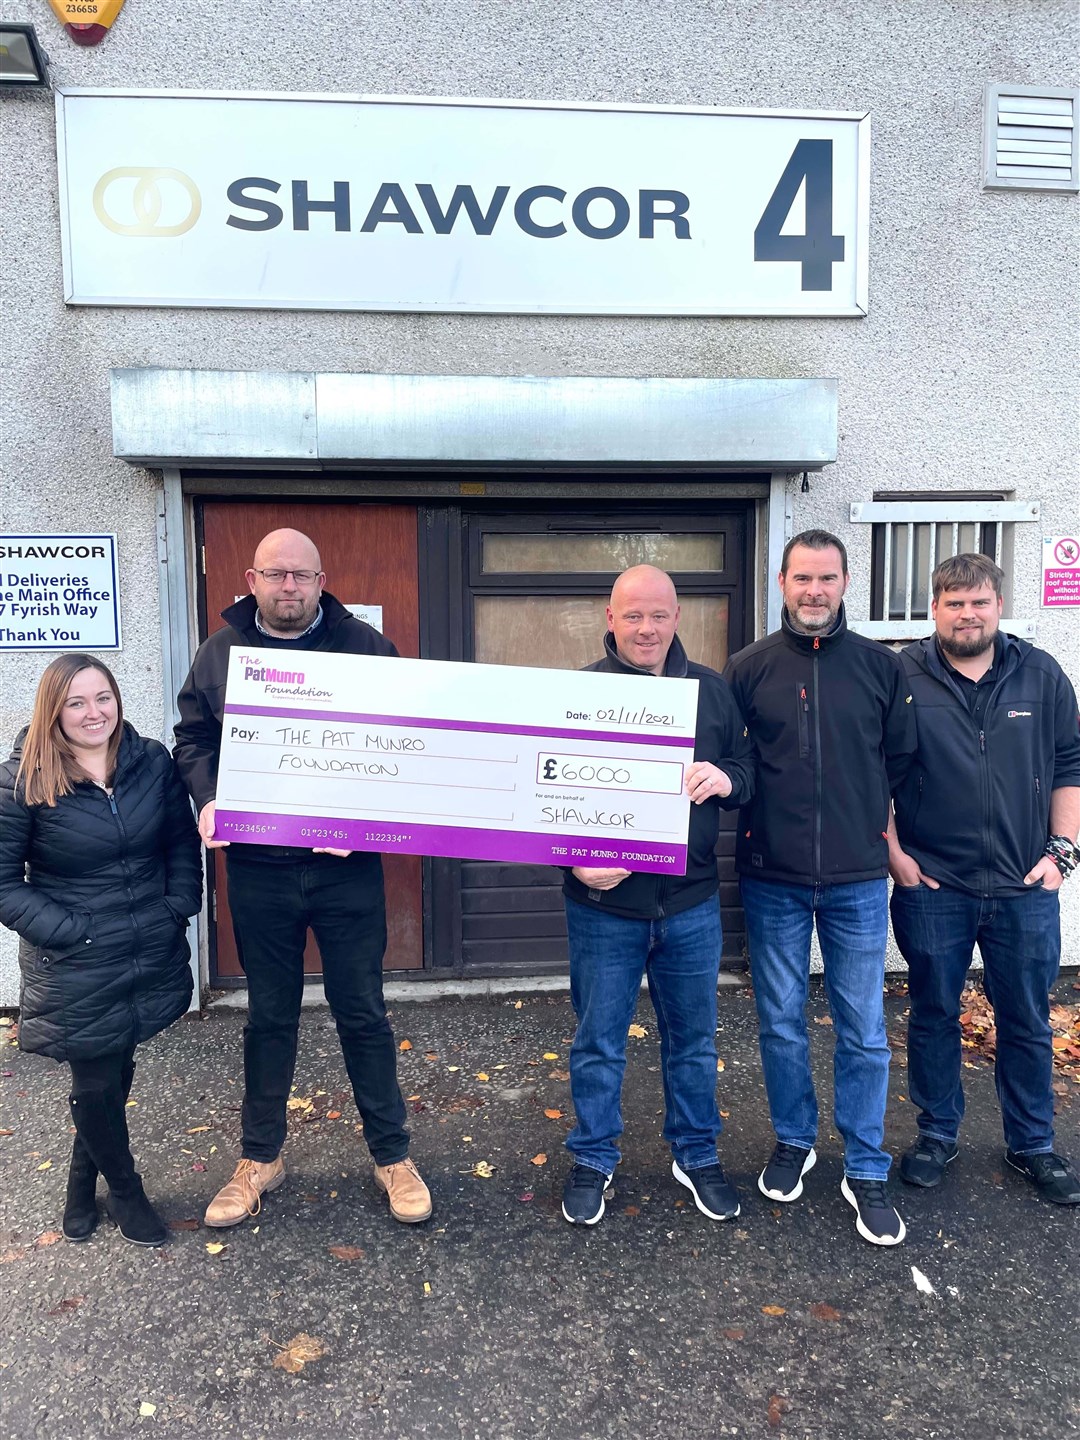 John Howden, Darren Gilliland and other SPS Offshore staff present the cheque to Lauren Munro.